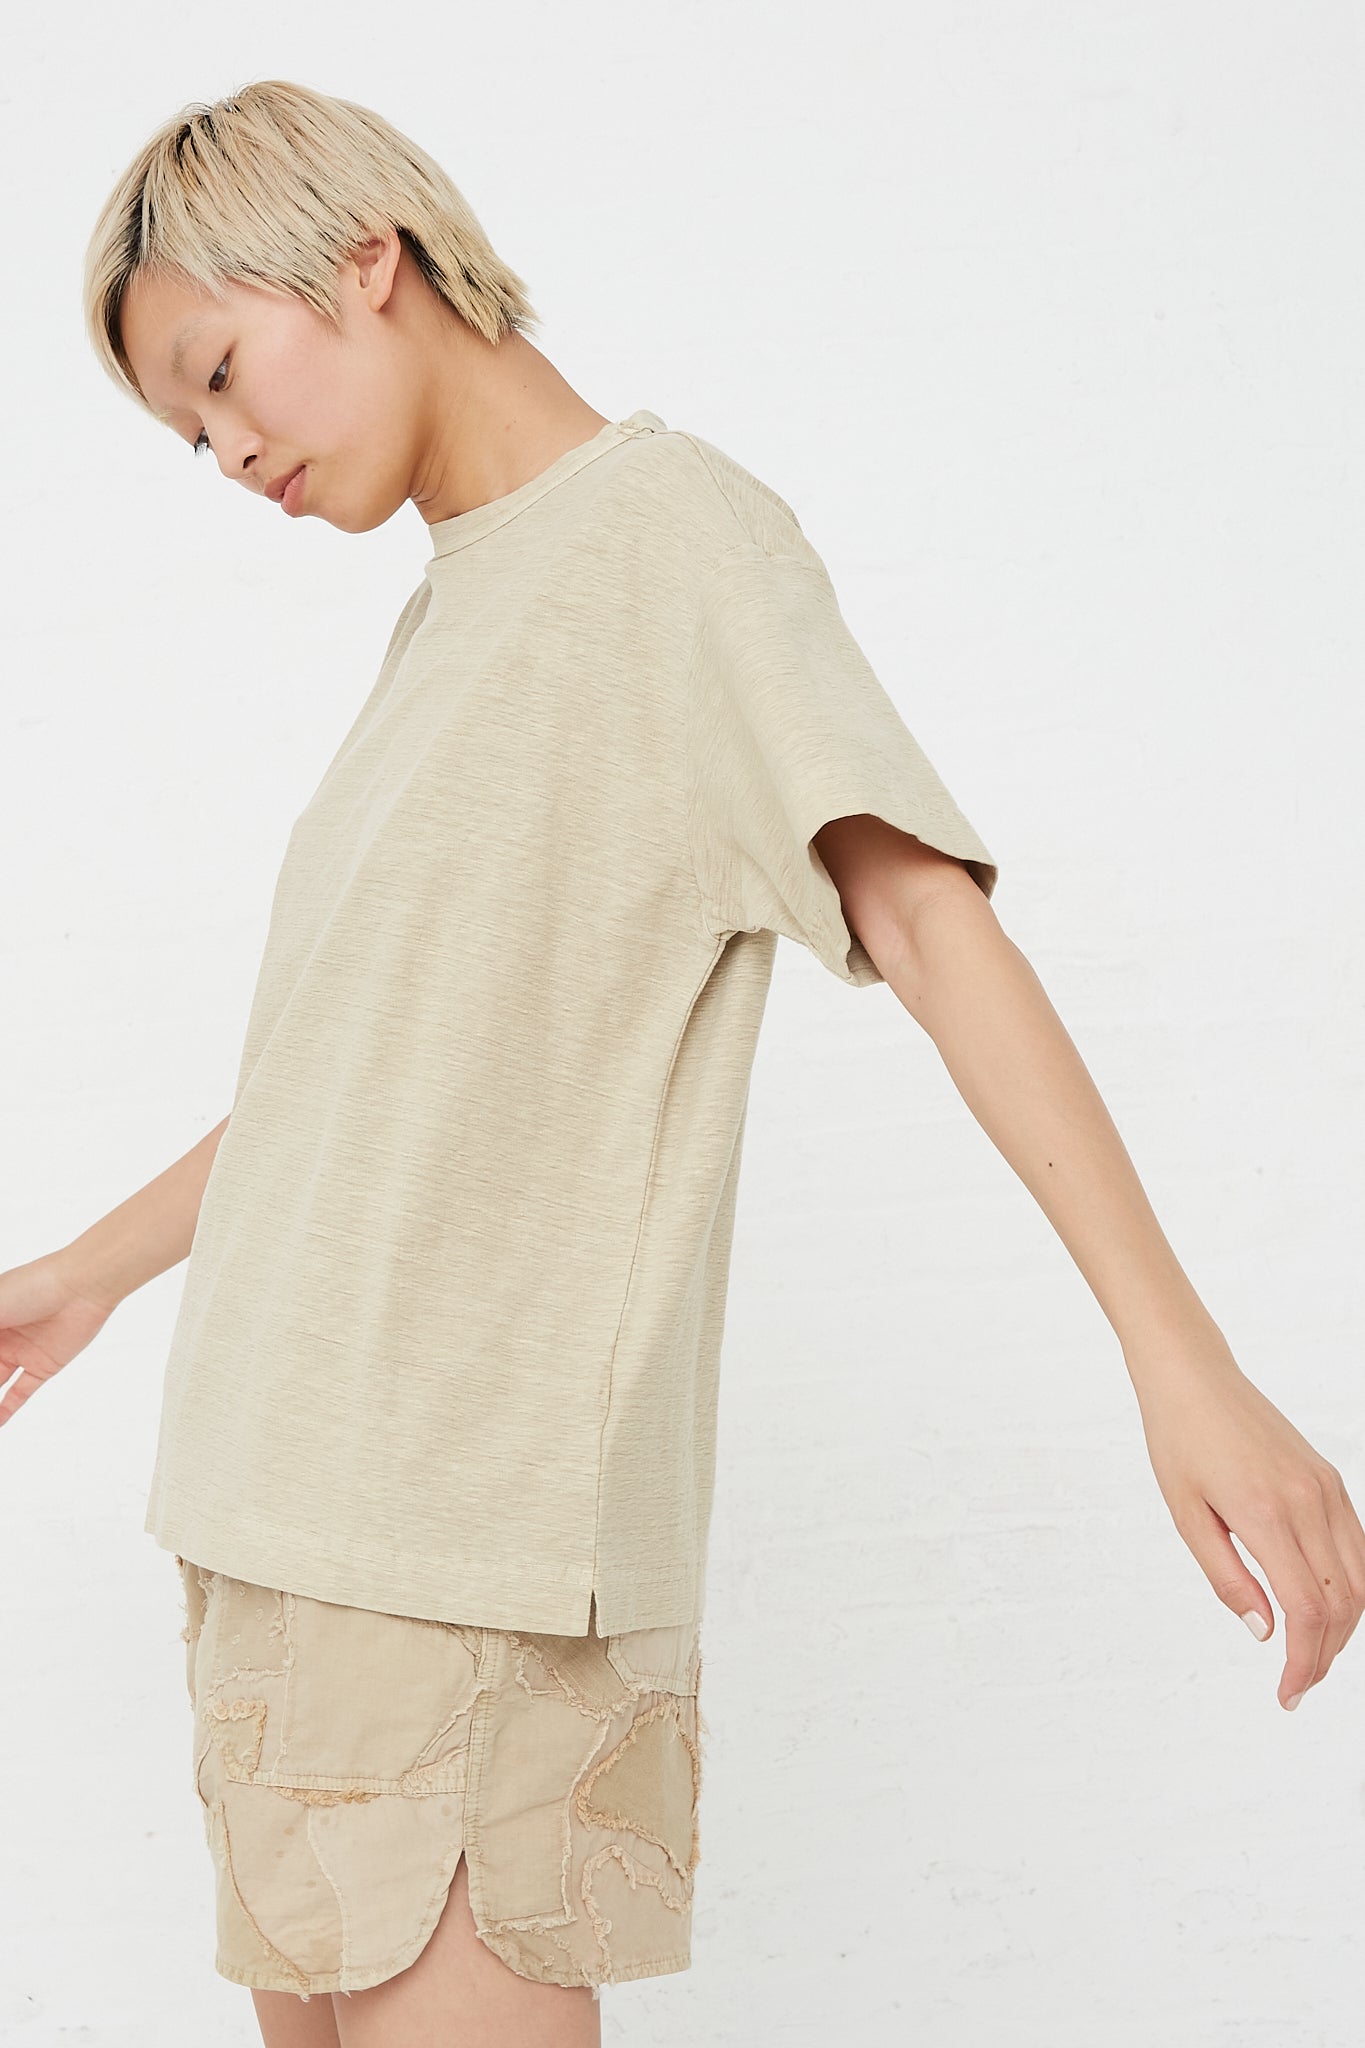 Dr. Collectors - Organic Cotton and Hemp Model Crop T Pigment Dye in Khaki side view